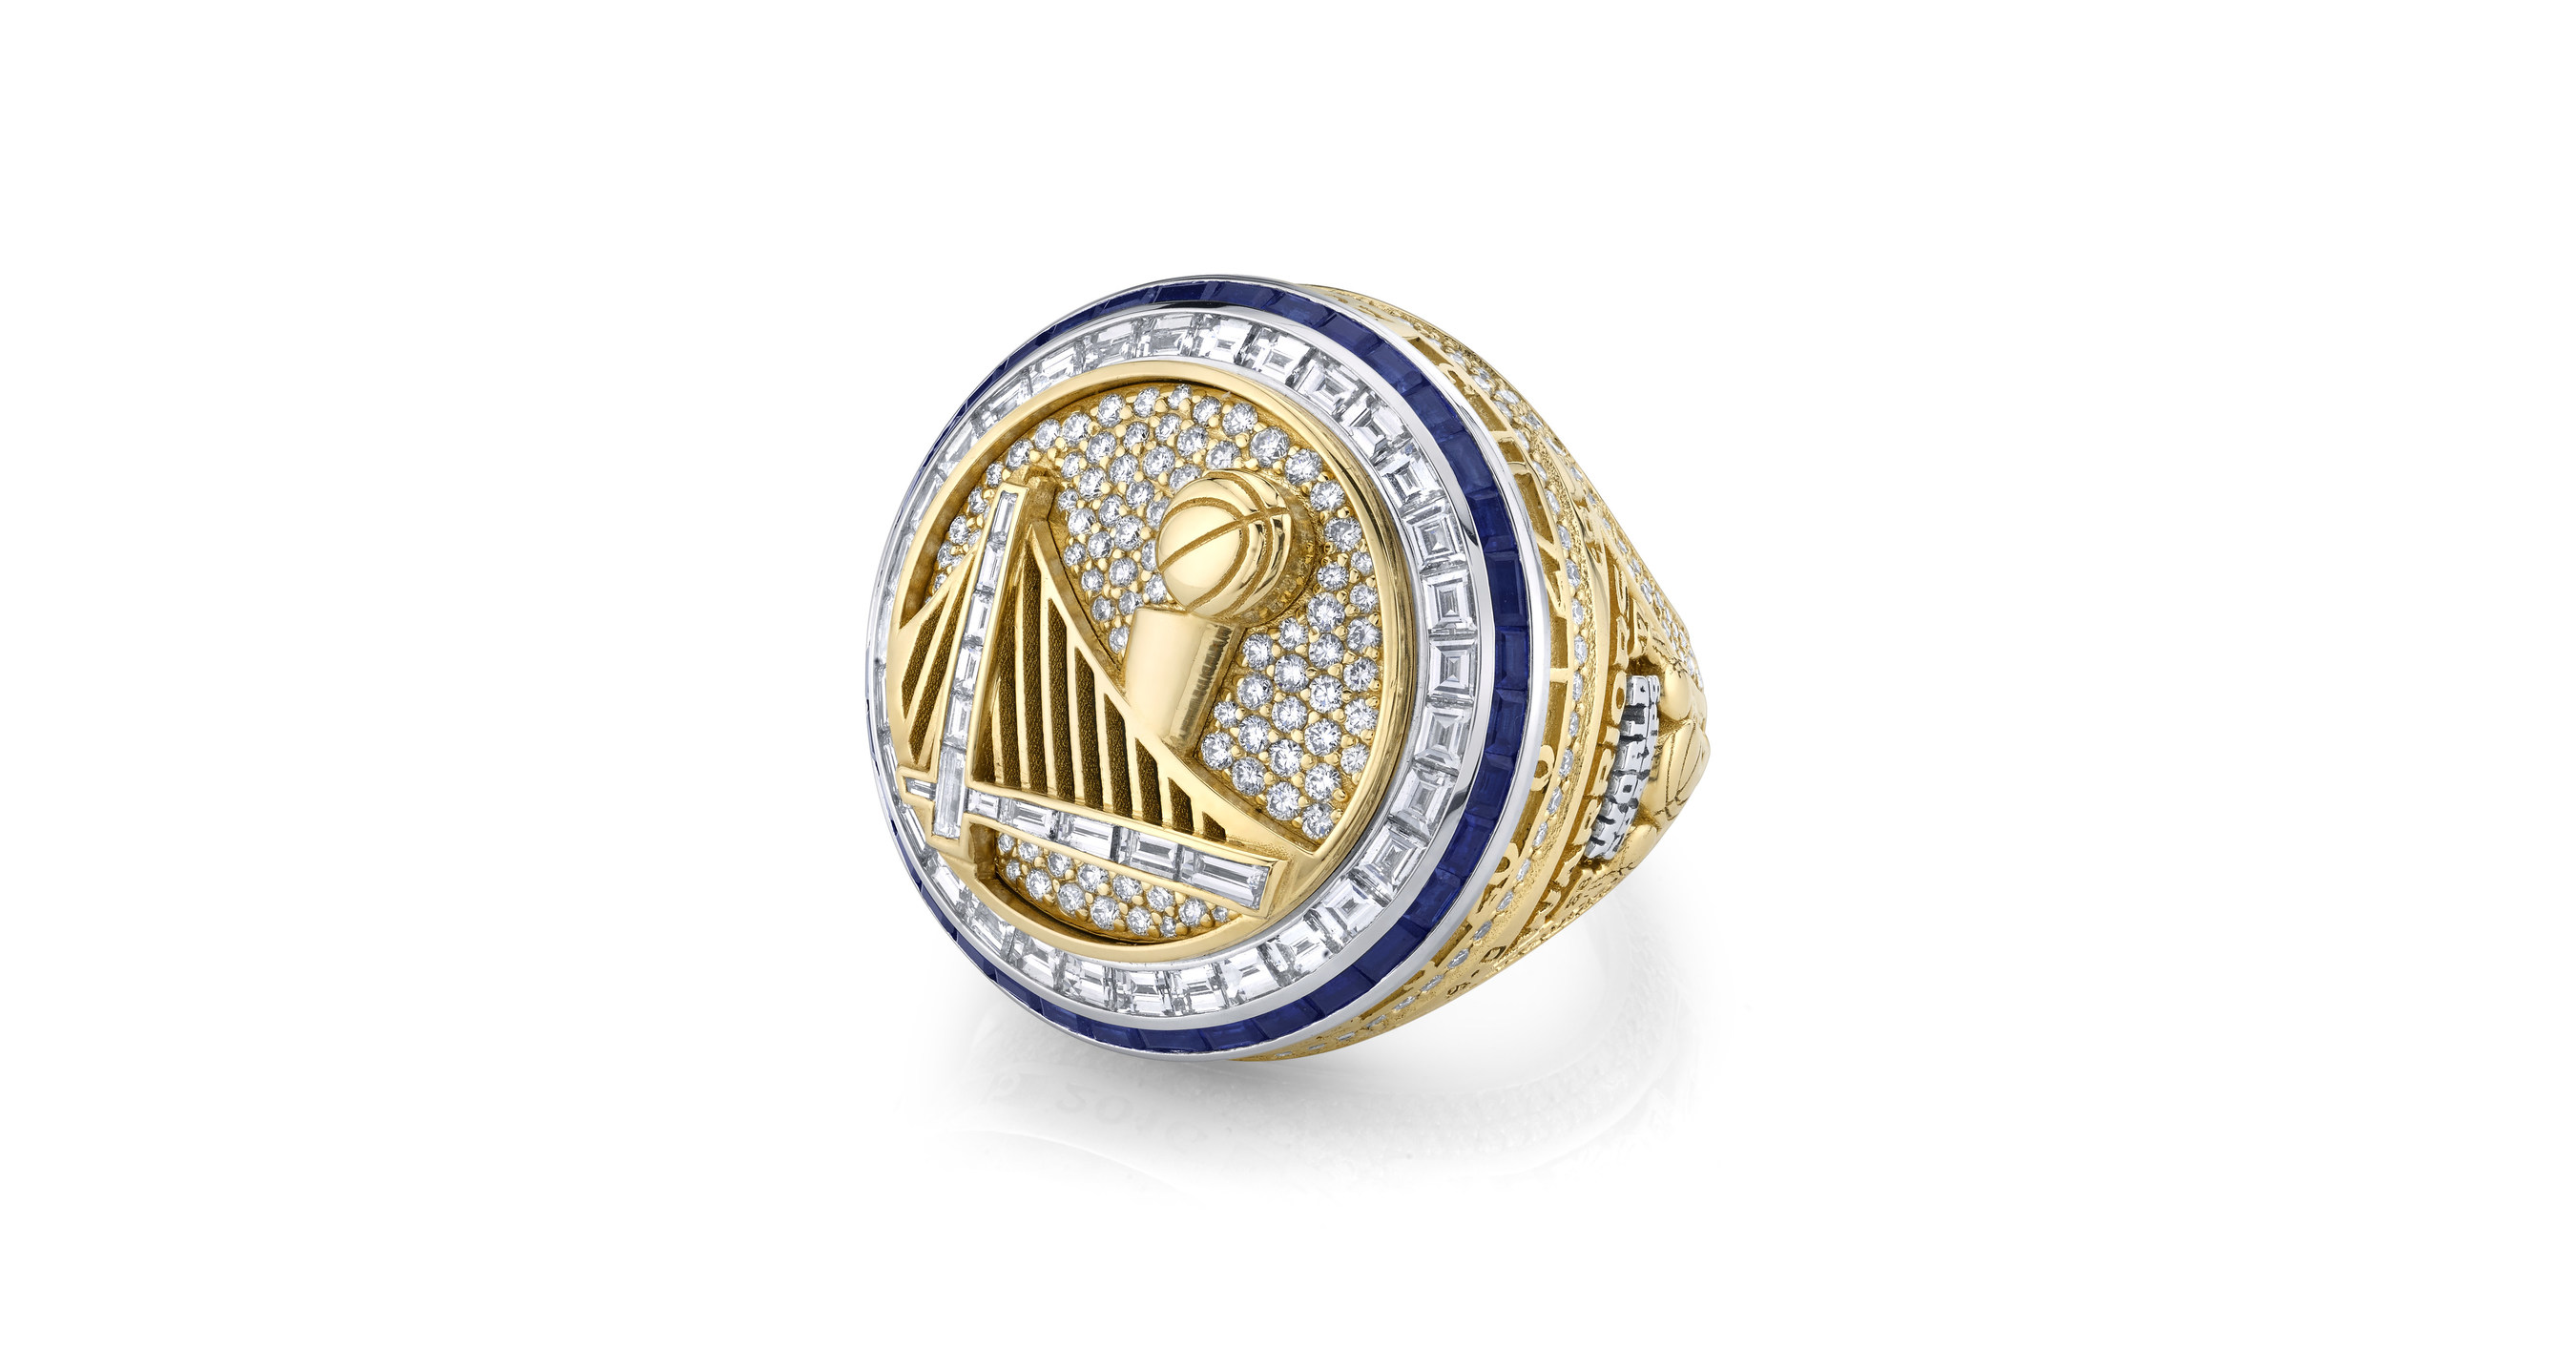 2018 NBA Championship Rings, Presented by Jason of Beverly Hills Photo  Gallery